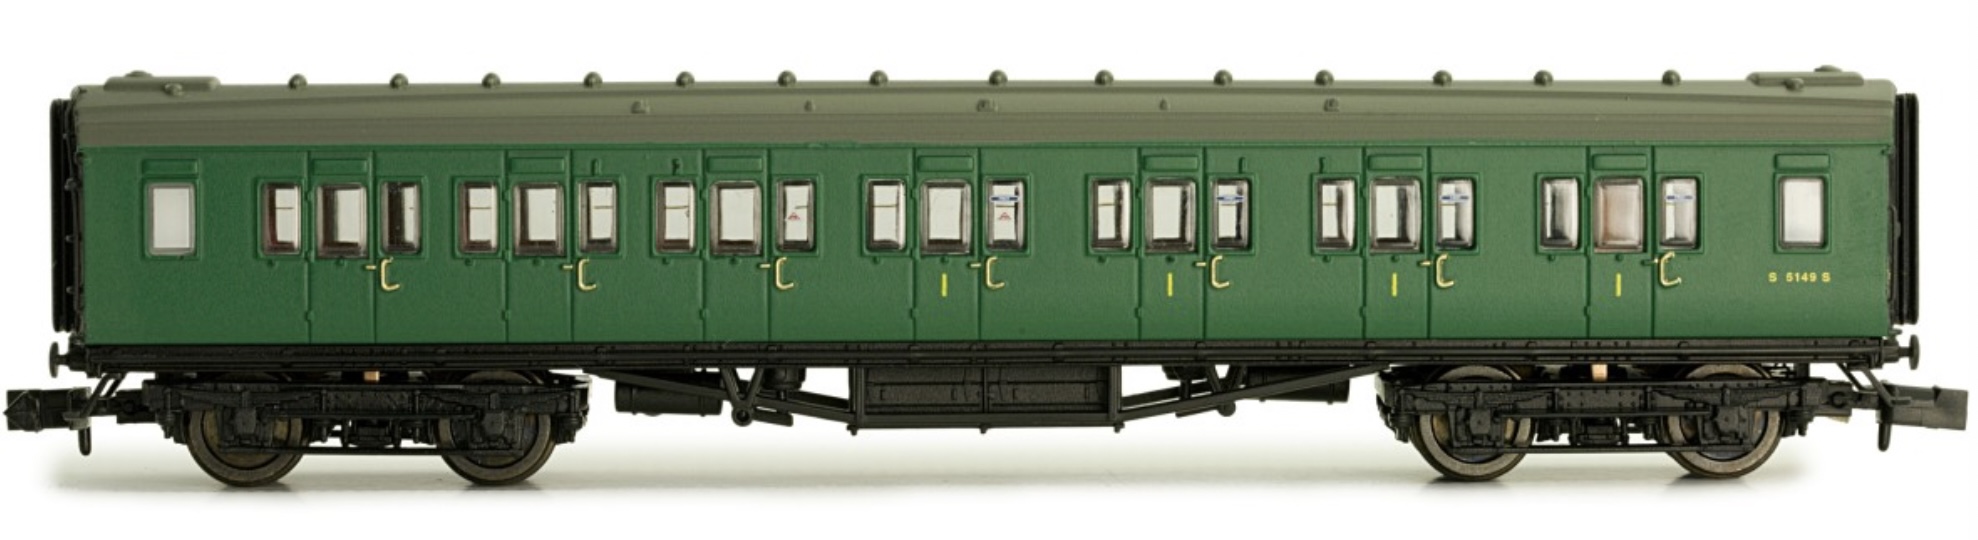 N Scale - Dapol - 2P-012-453 - Passenger Car, Coach, Maunsell, Composite - Southern (UK) - 5150